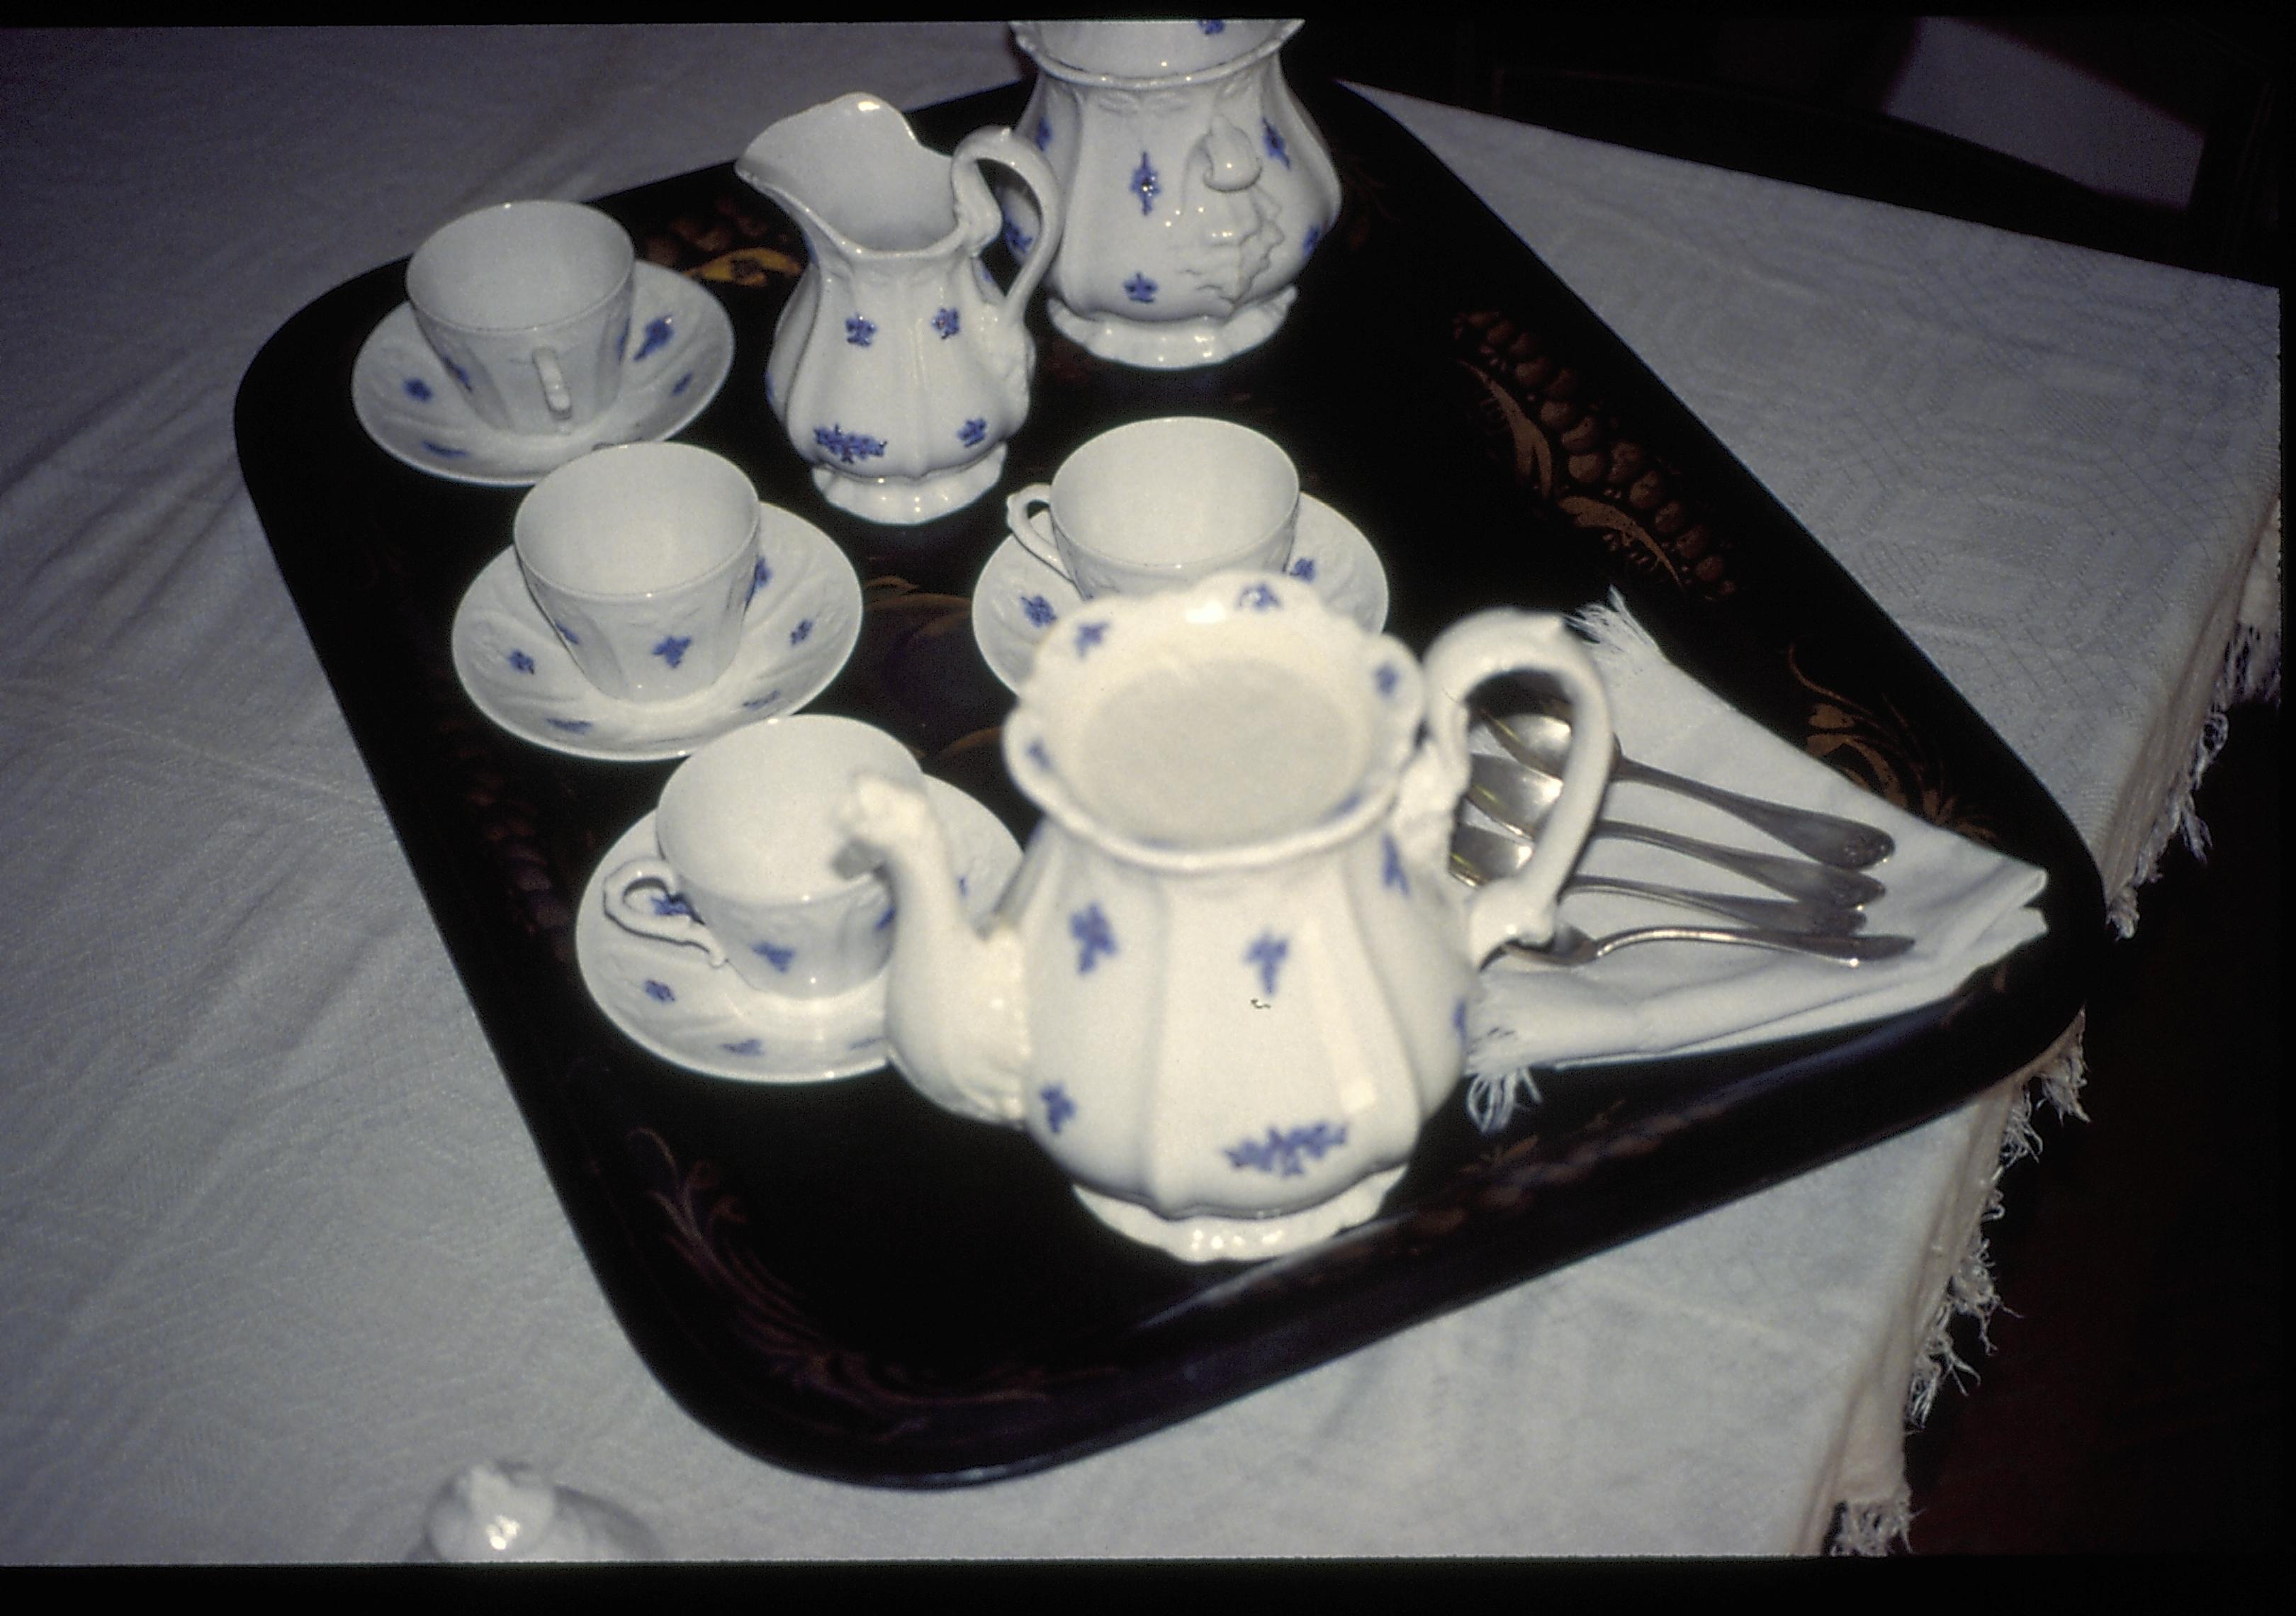 Cups, saucers, pitcher and spoons on table in dining room. Lincoln Home NHS- Christmas in Lincoln Home 1997, HS-20 Film Roll #17 Christmas, decorations